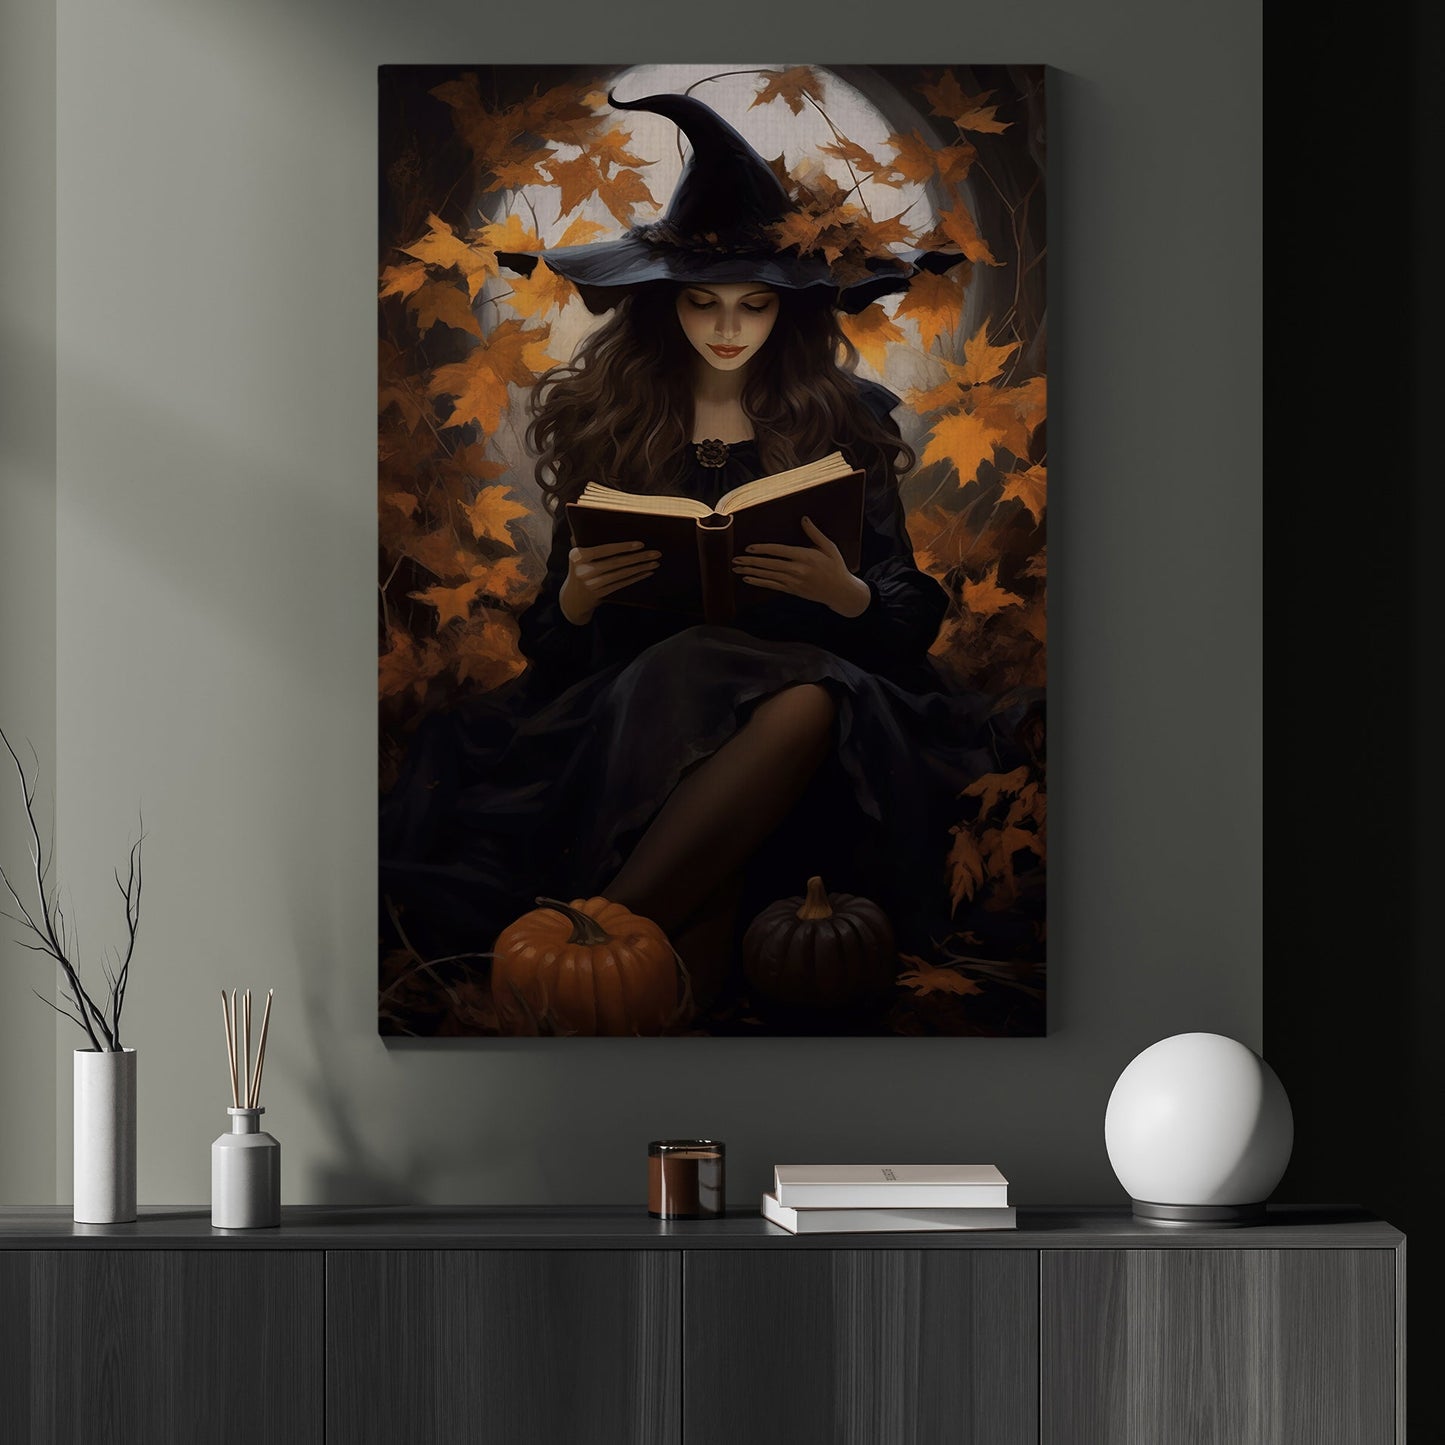 Spelling Witch Reading Book In Halloween Night Vintage Gothic Wall Art Print - Dark Academia Magic Witchy Halloween Wall Decor